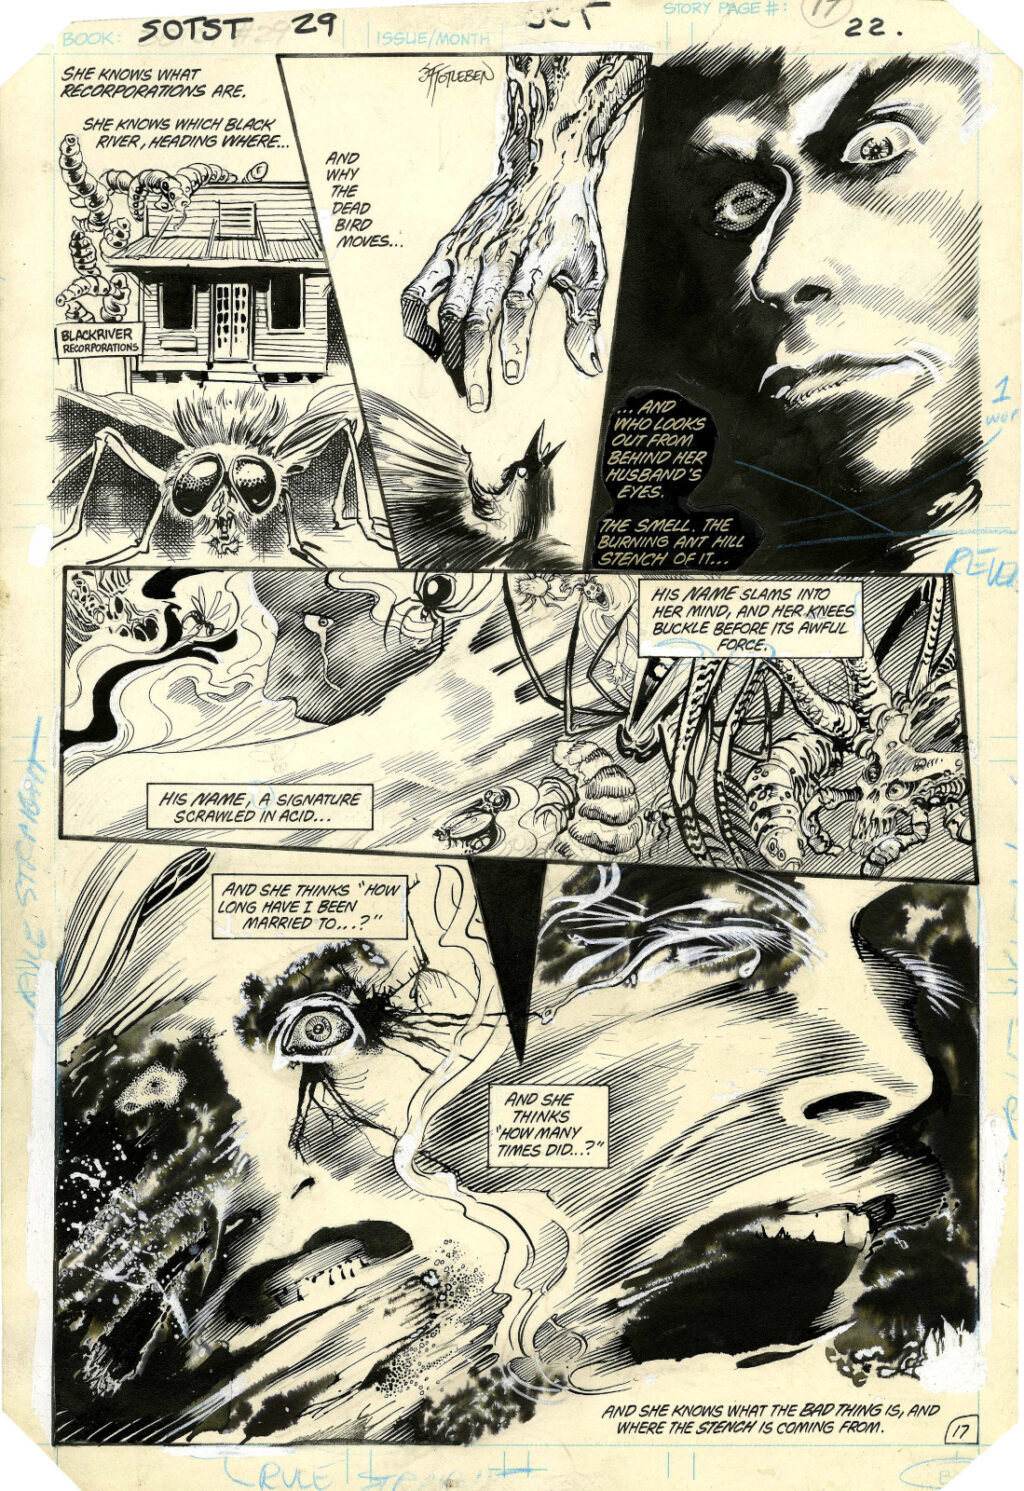 Saga of the Swamp Thing issue 29 page 17 by Stephen Bissette and John Totleben